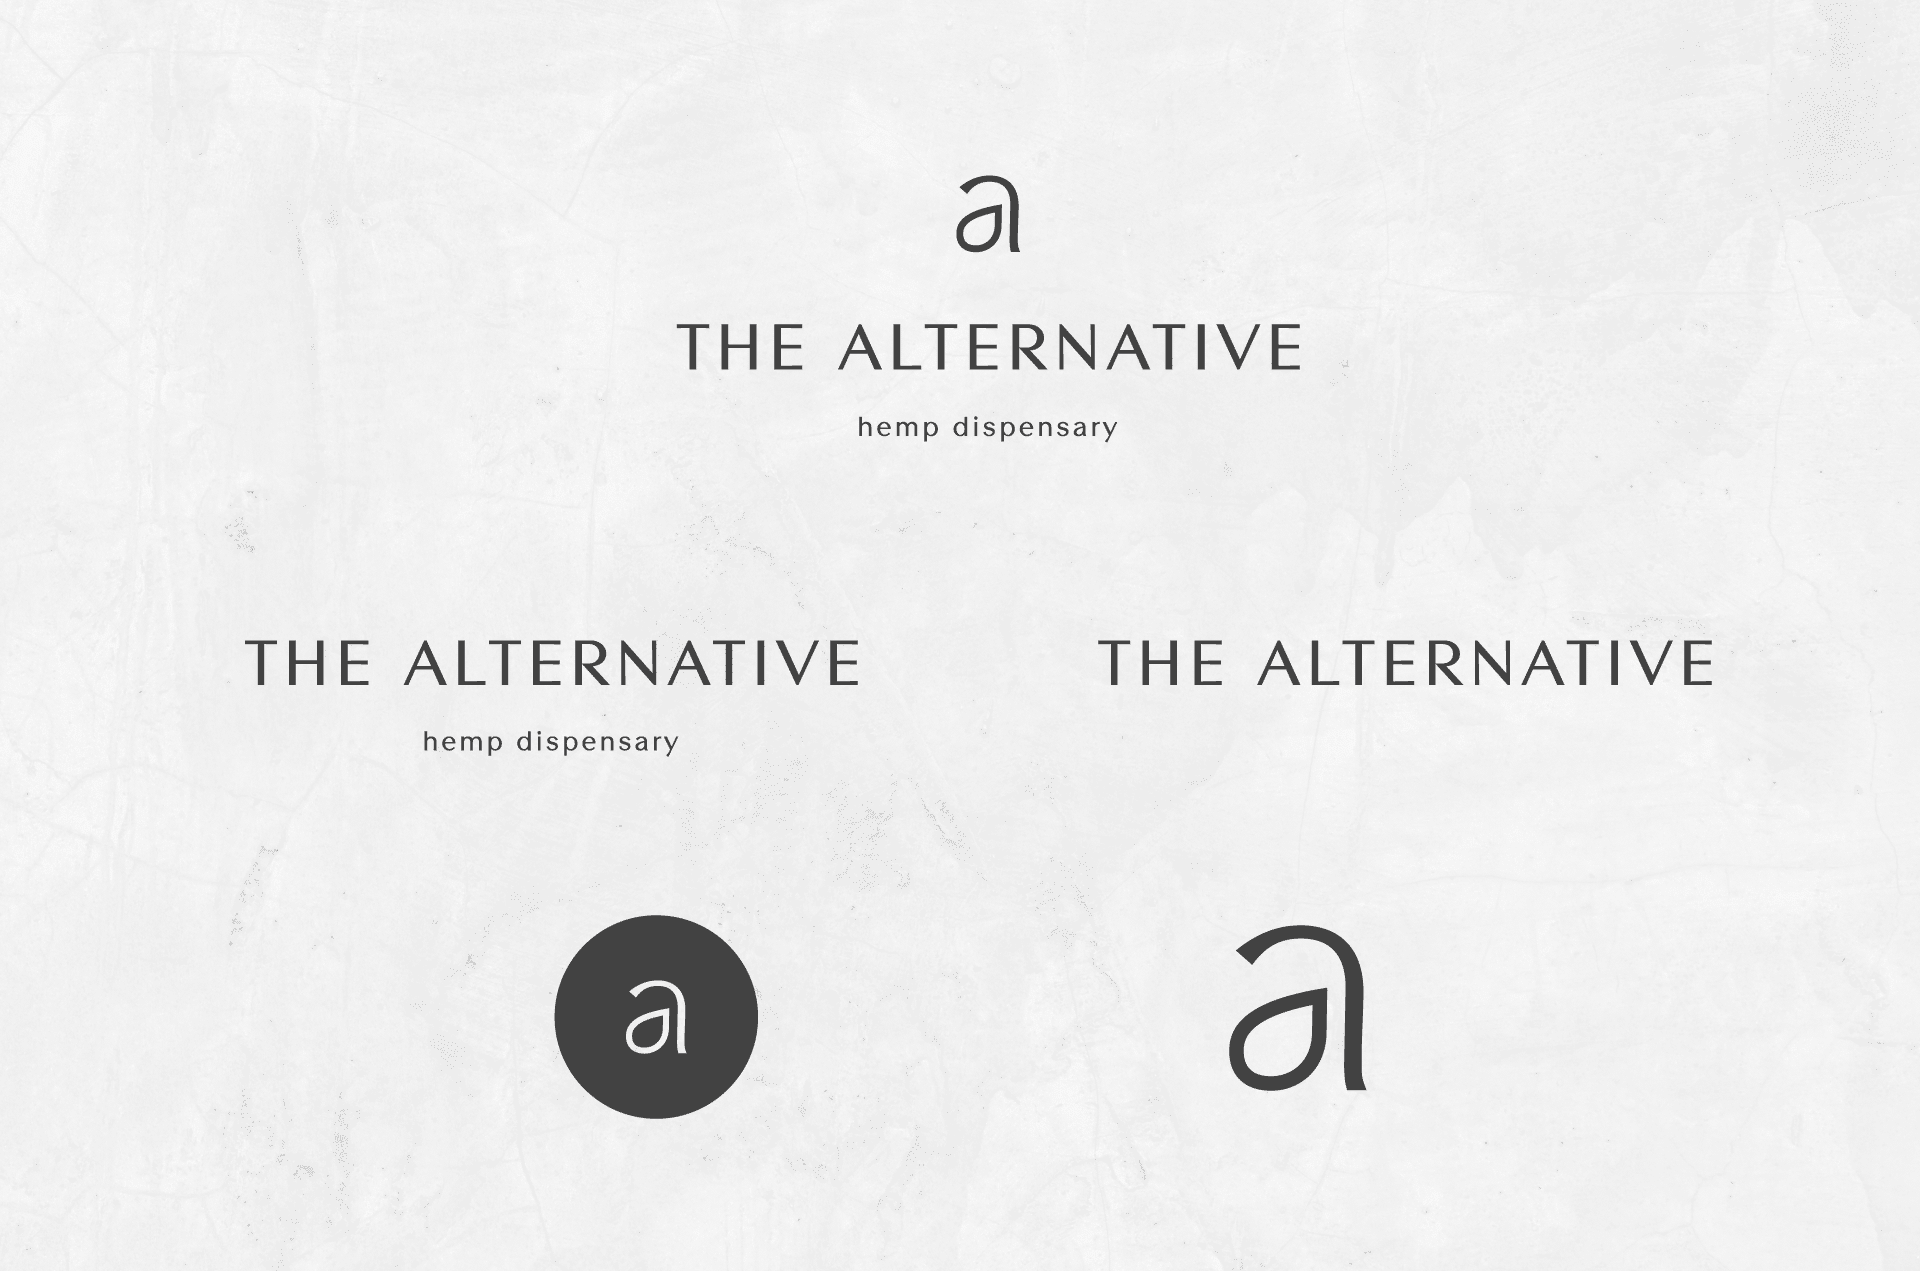 The Alternative logos and branding examples.